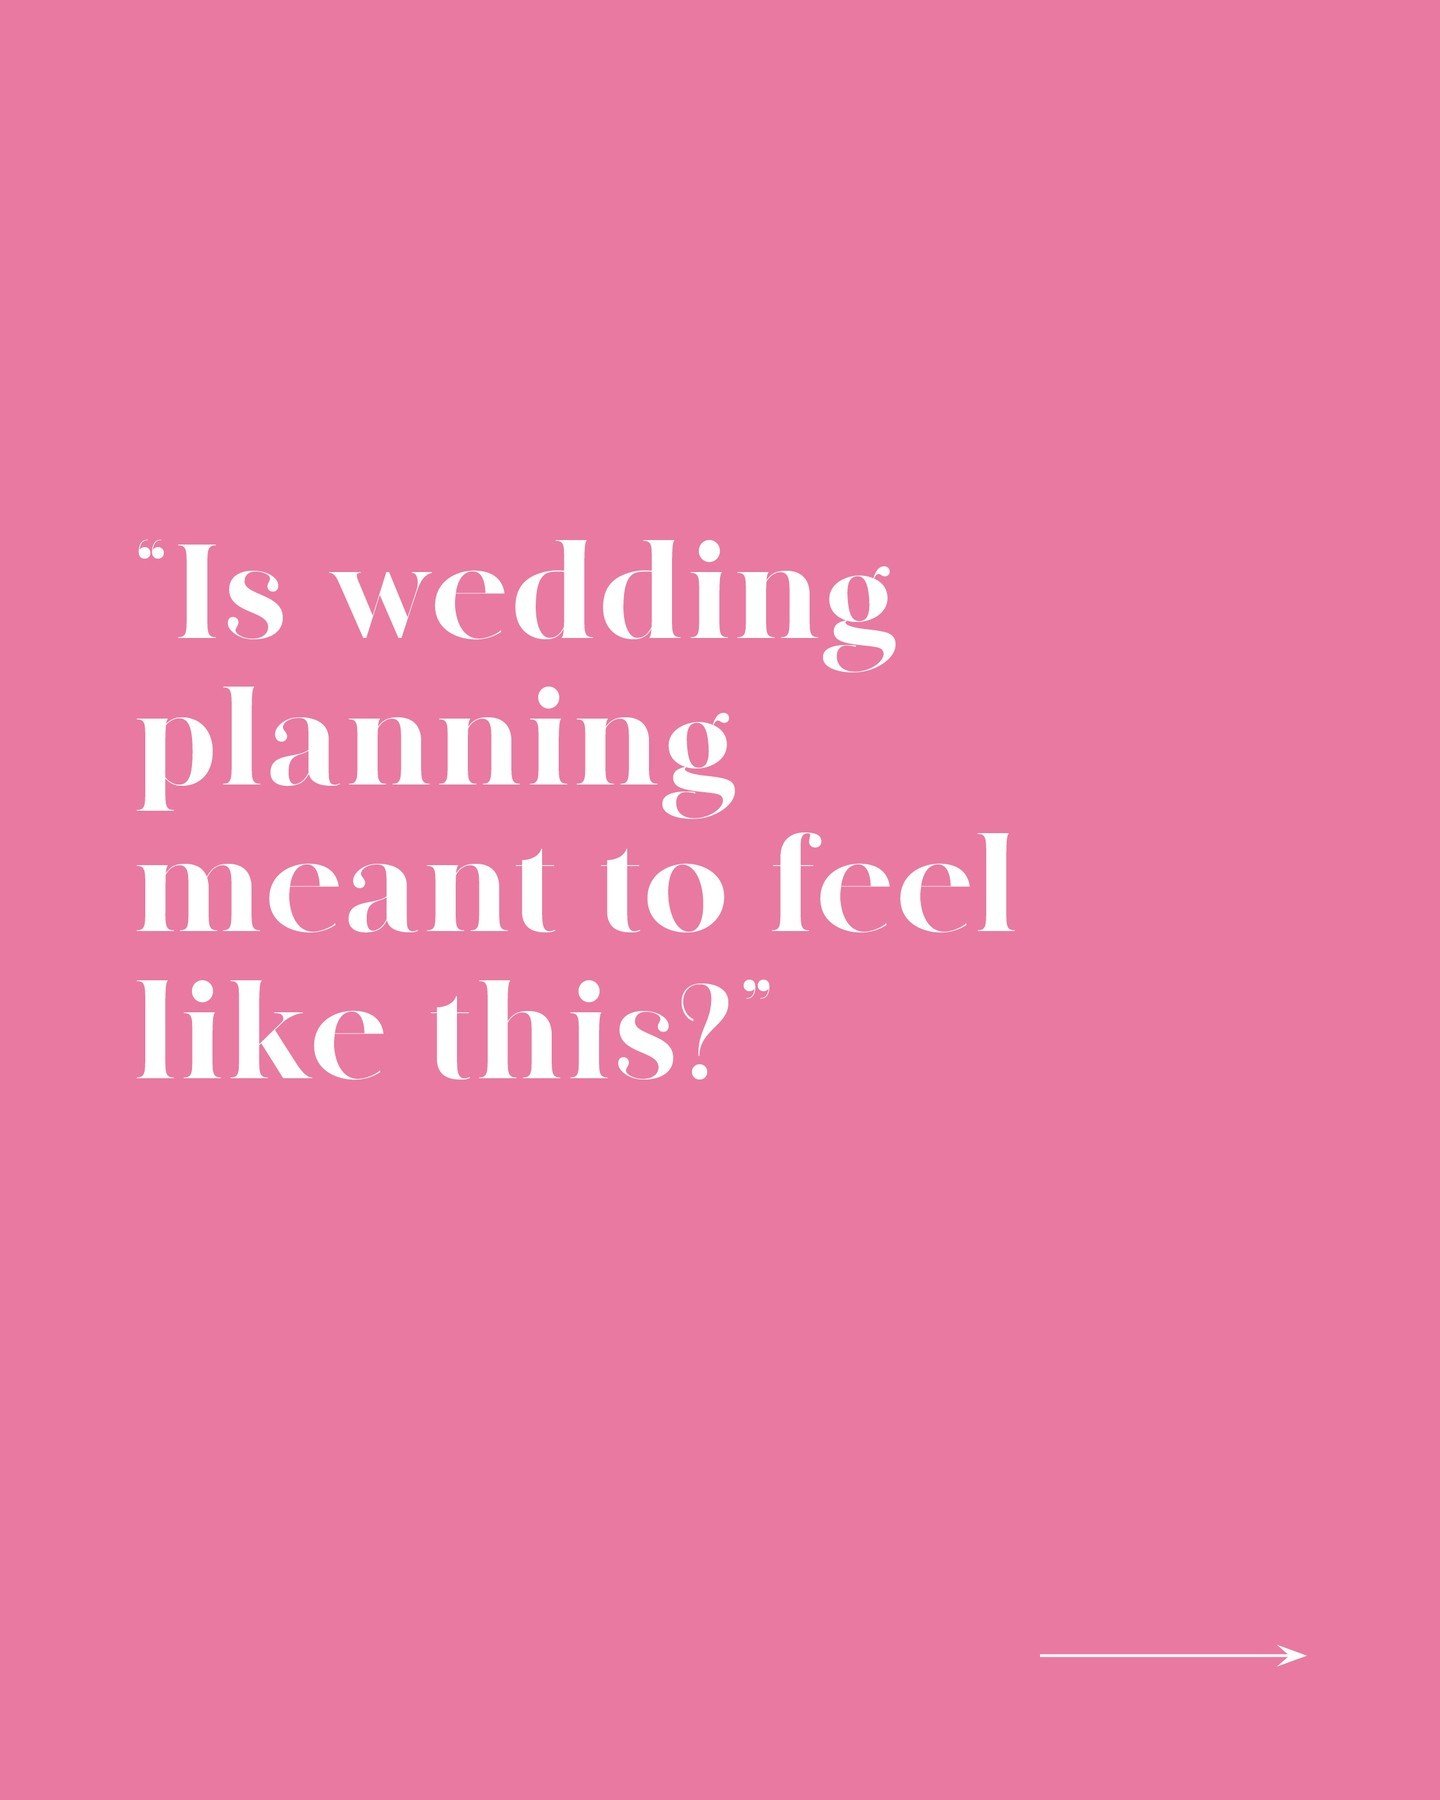 Wedding planning - but without the overwhelm? Sign me up! ✍🏽

Feeling anxious, overwhelmed, and confused...but want to feel like an empowered, confident wedding planning goddess. 

Then join The Club, our exclusive Italian Wedding Planning Membershi